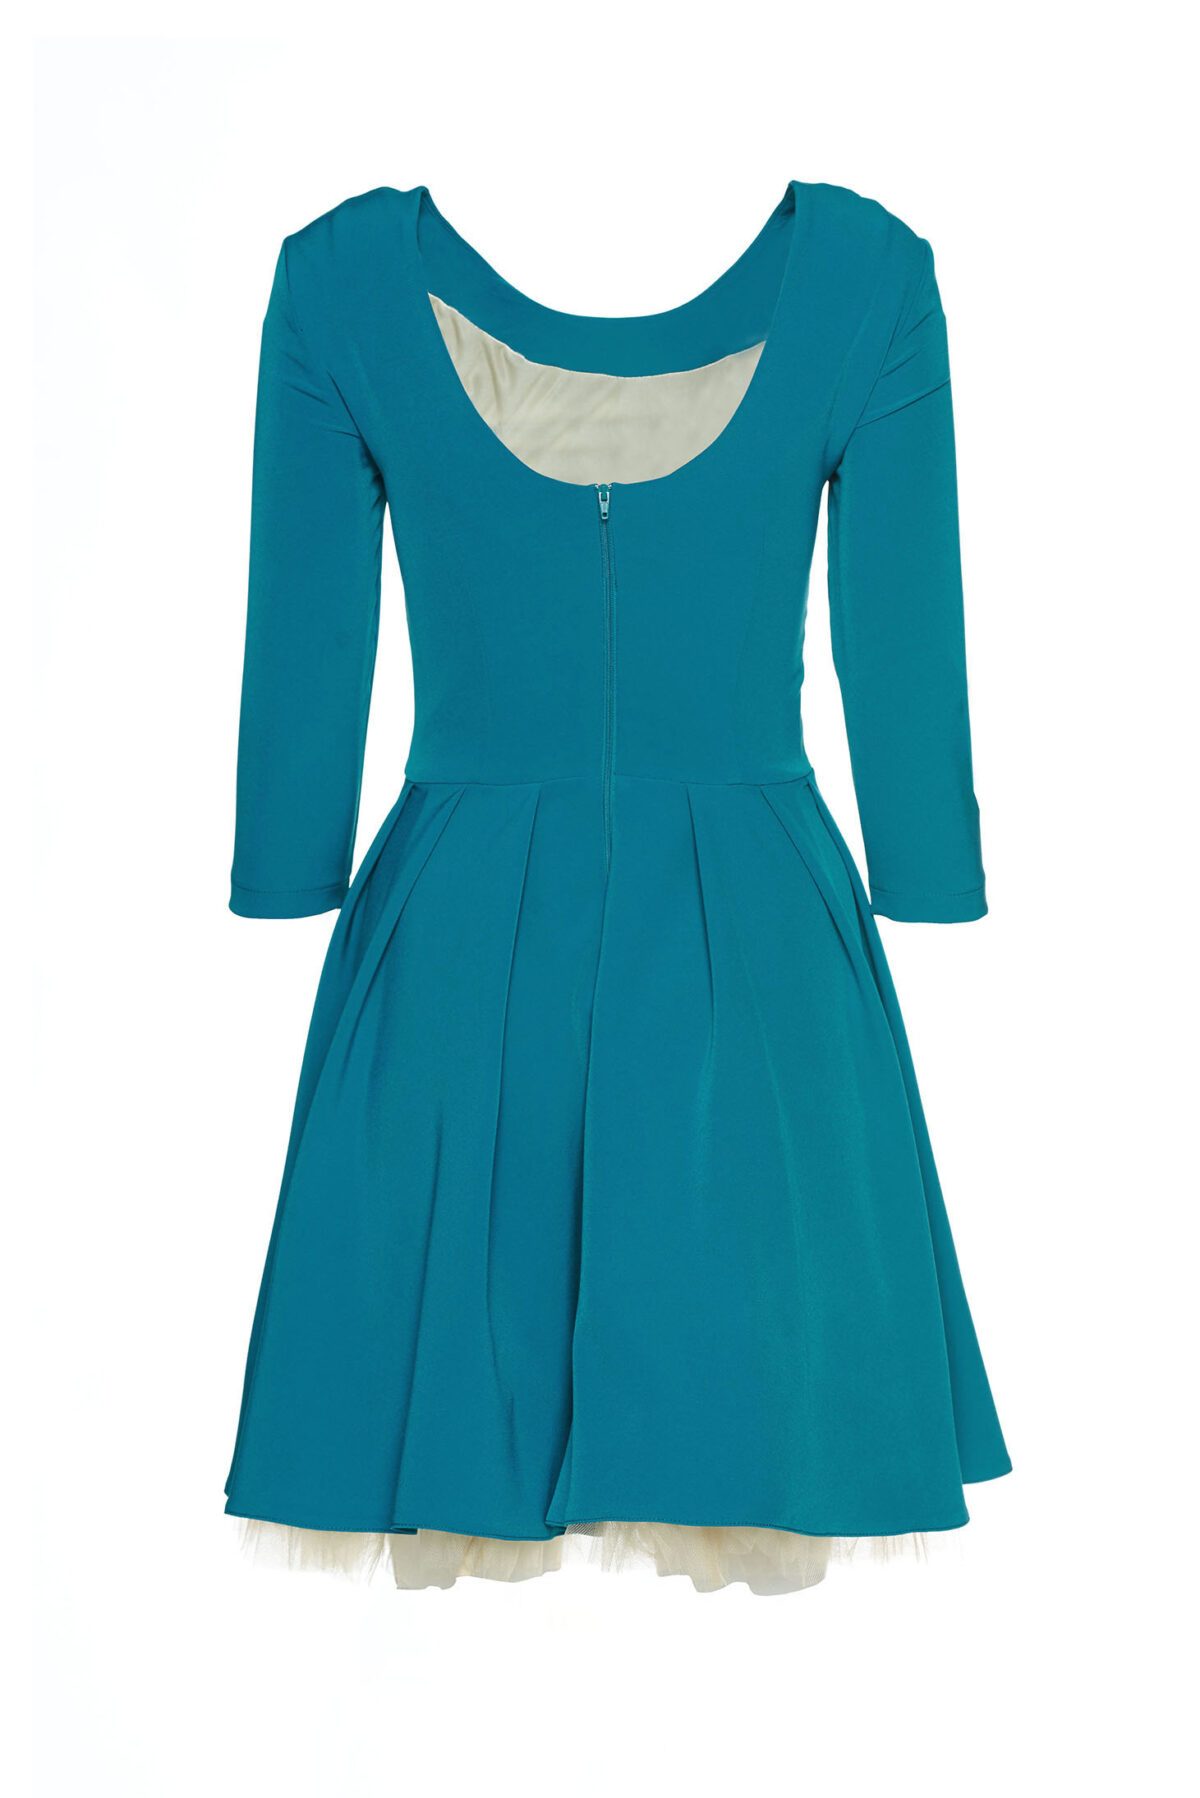 Theo Rose Girly Turquoise Embroidered Dress